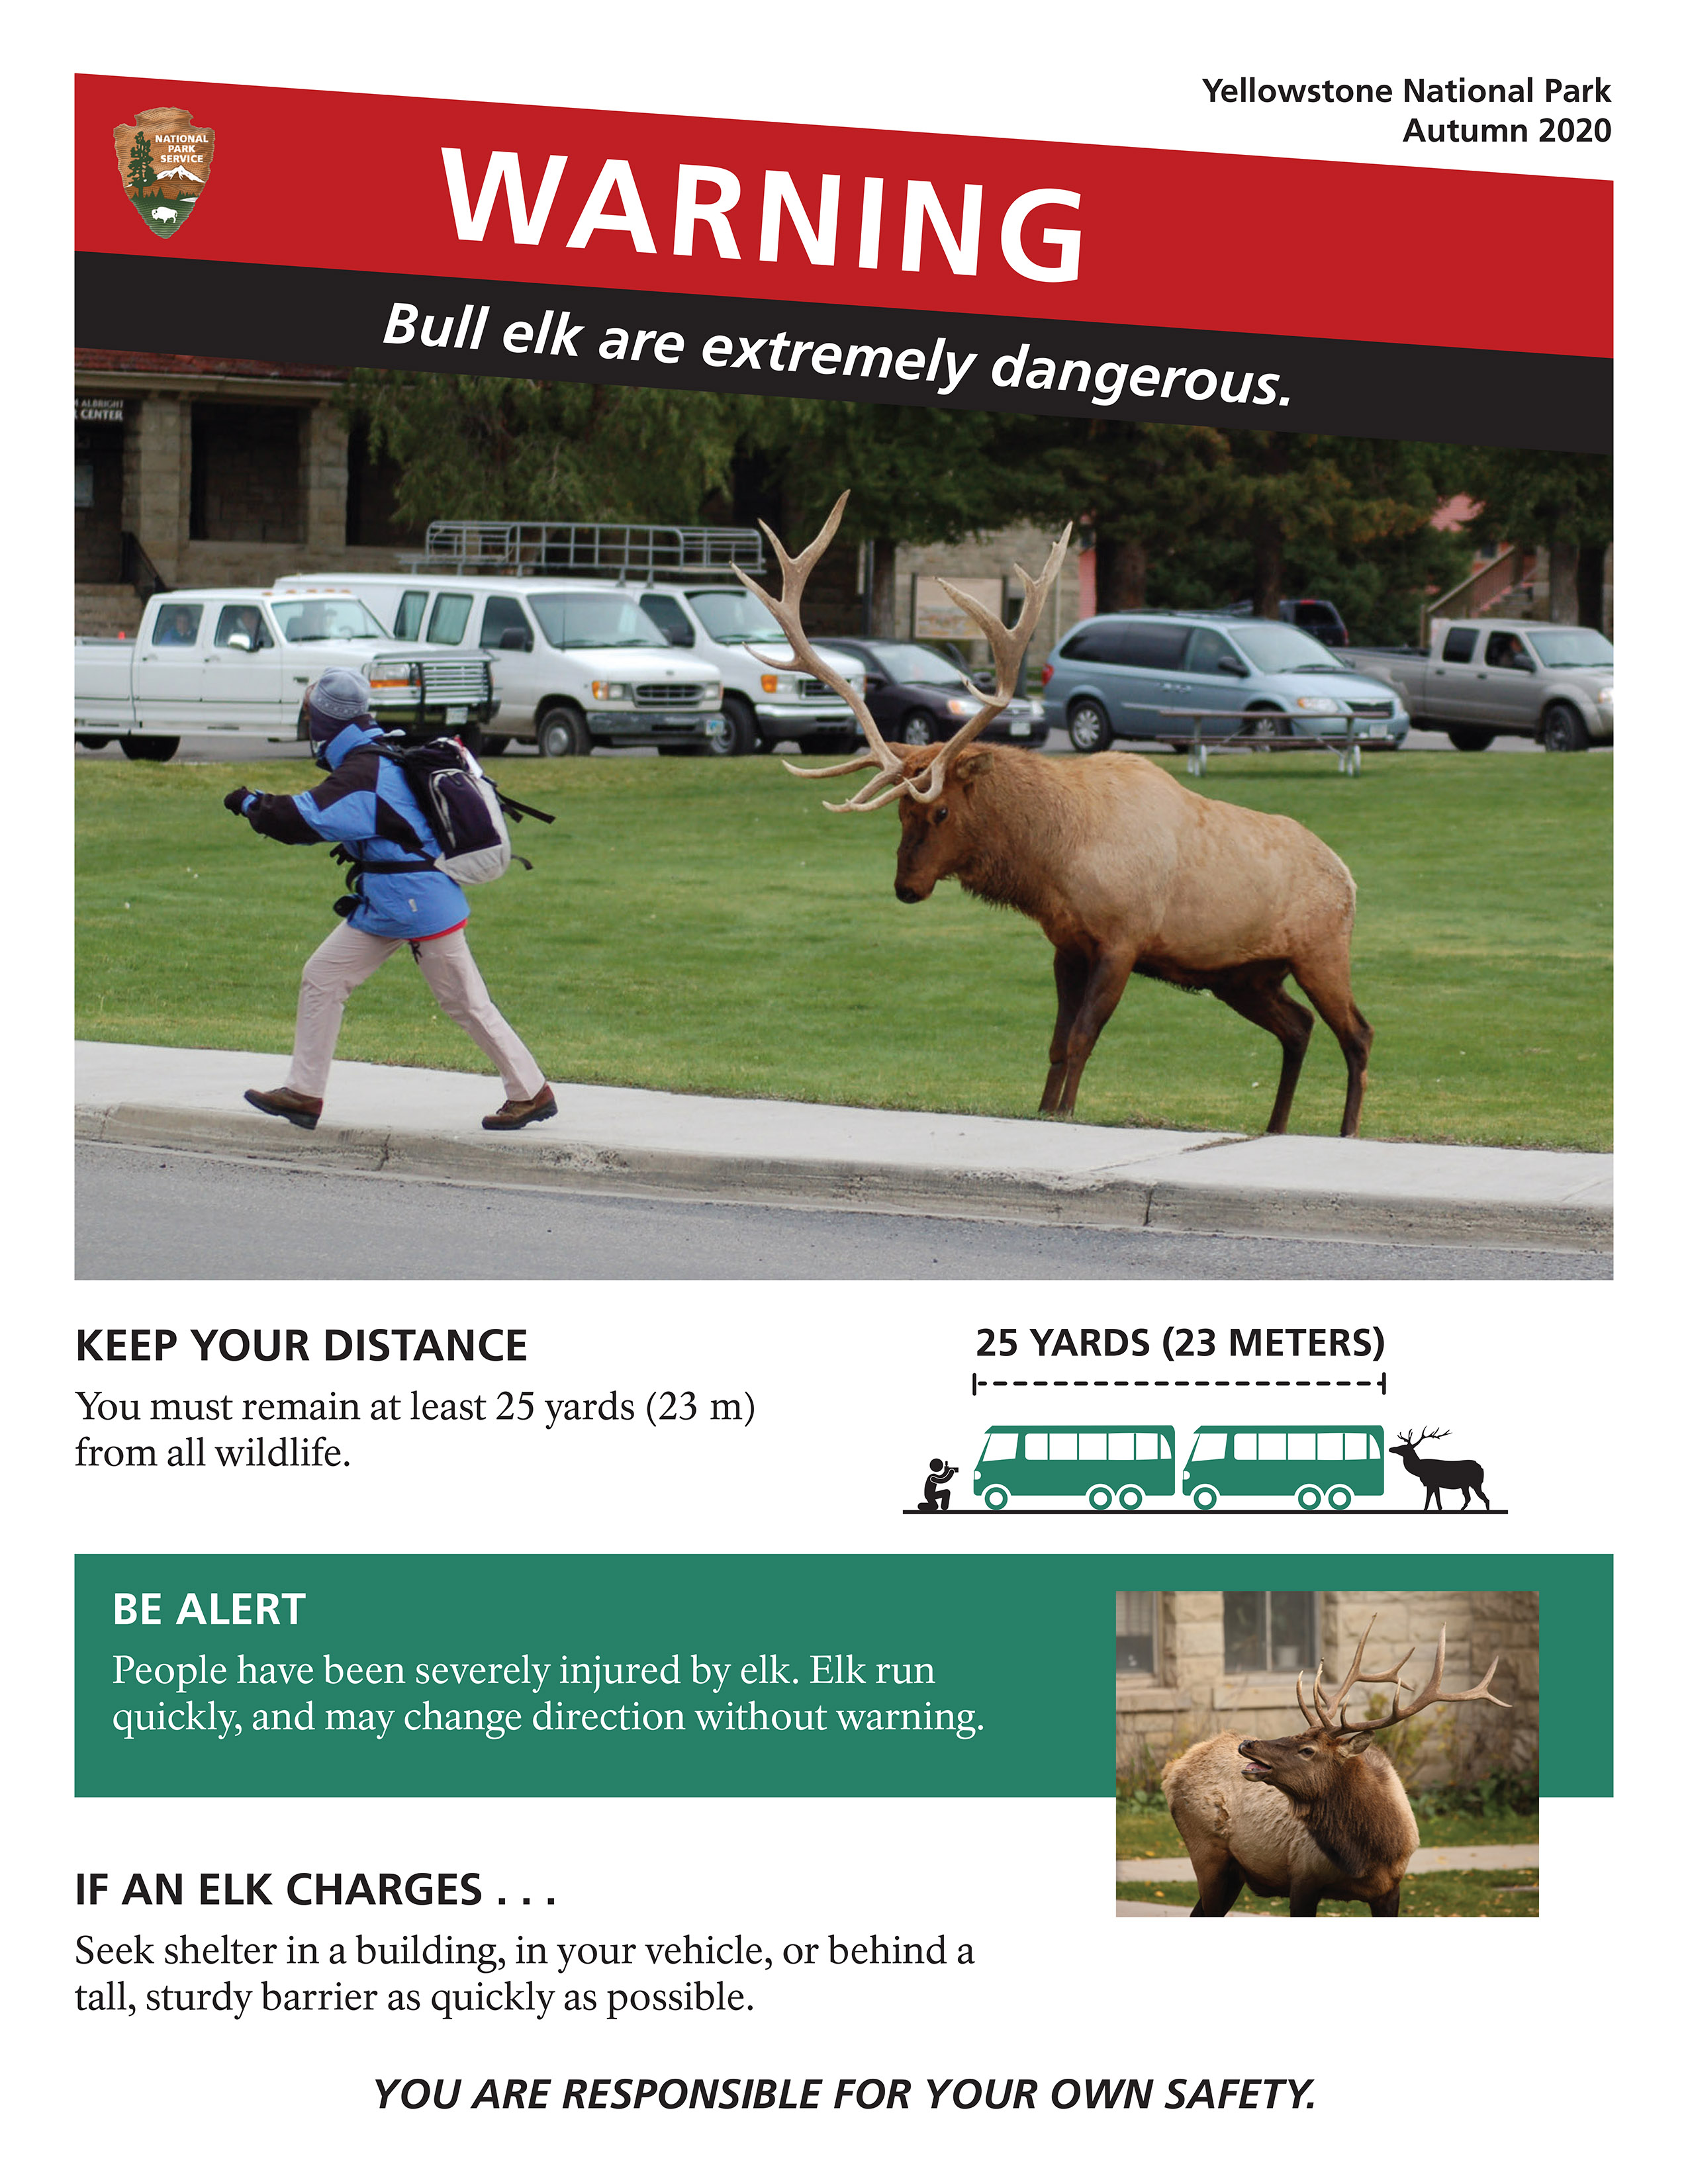 A poster visualizing how elk can chase people and the distance one should keep from elk